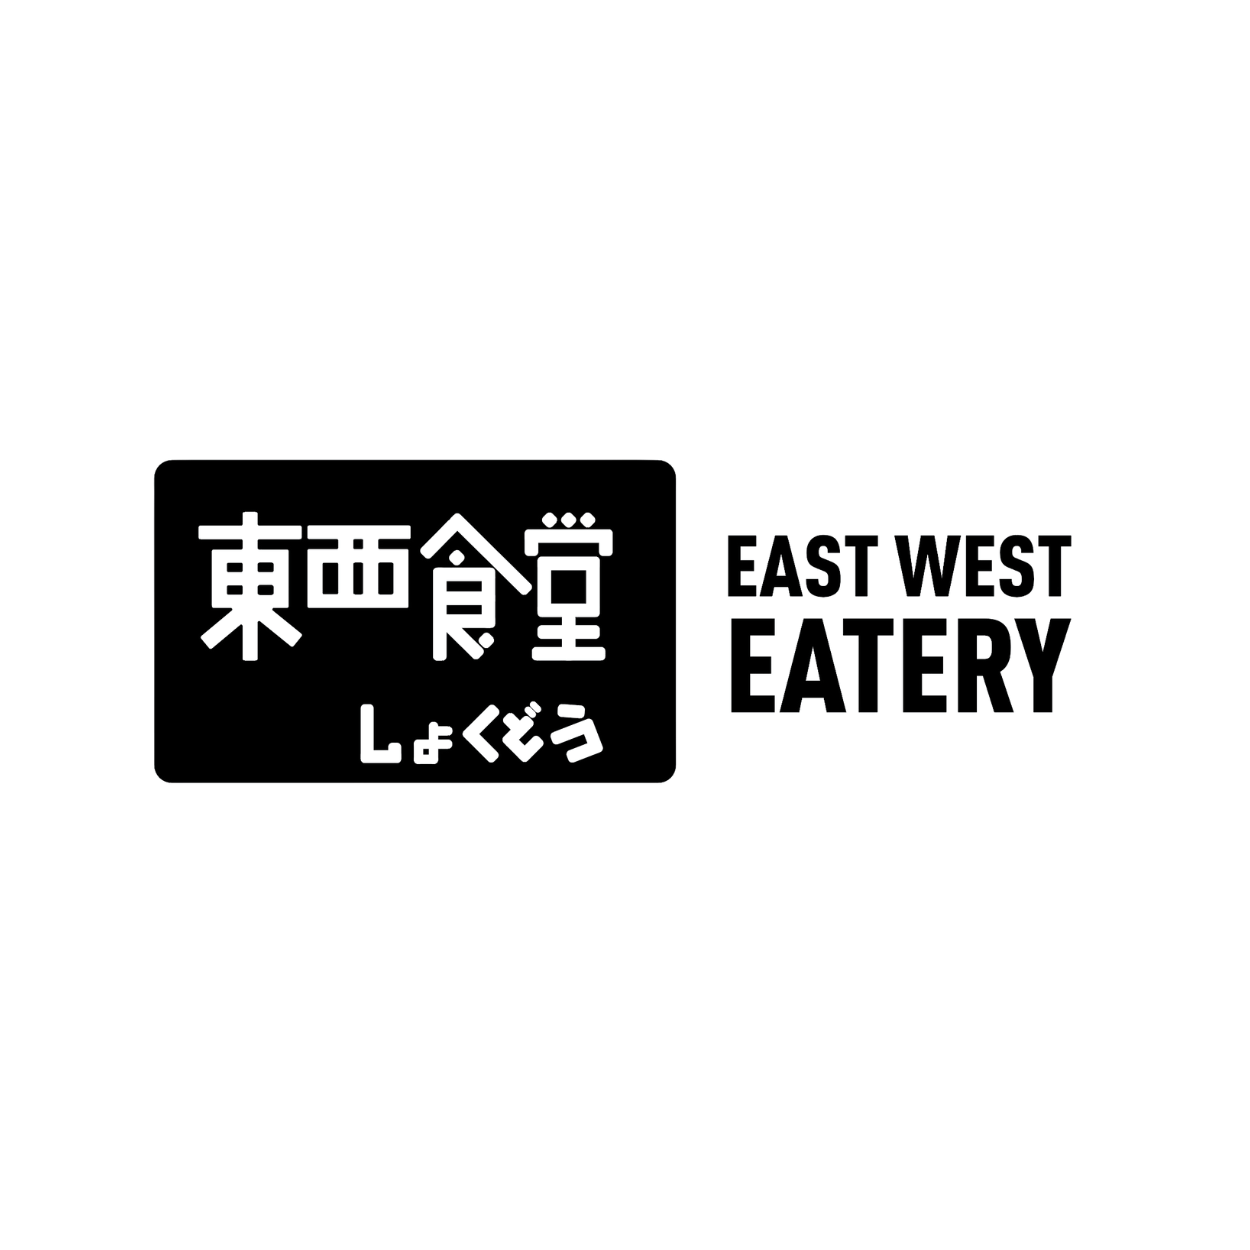 East West Eatery